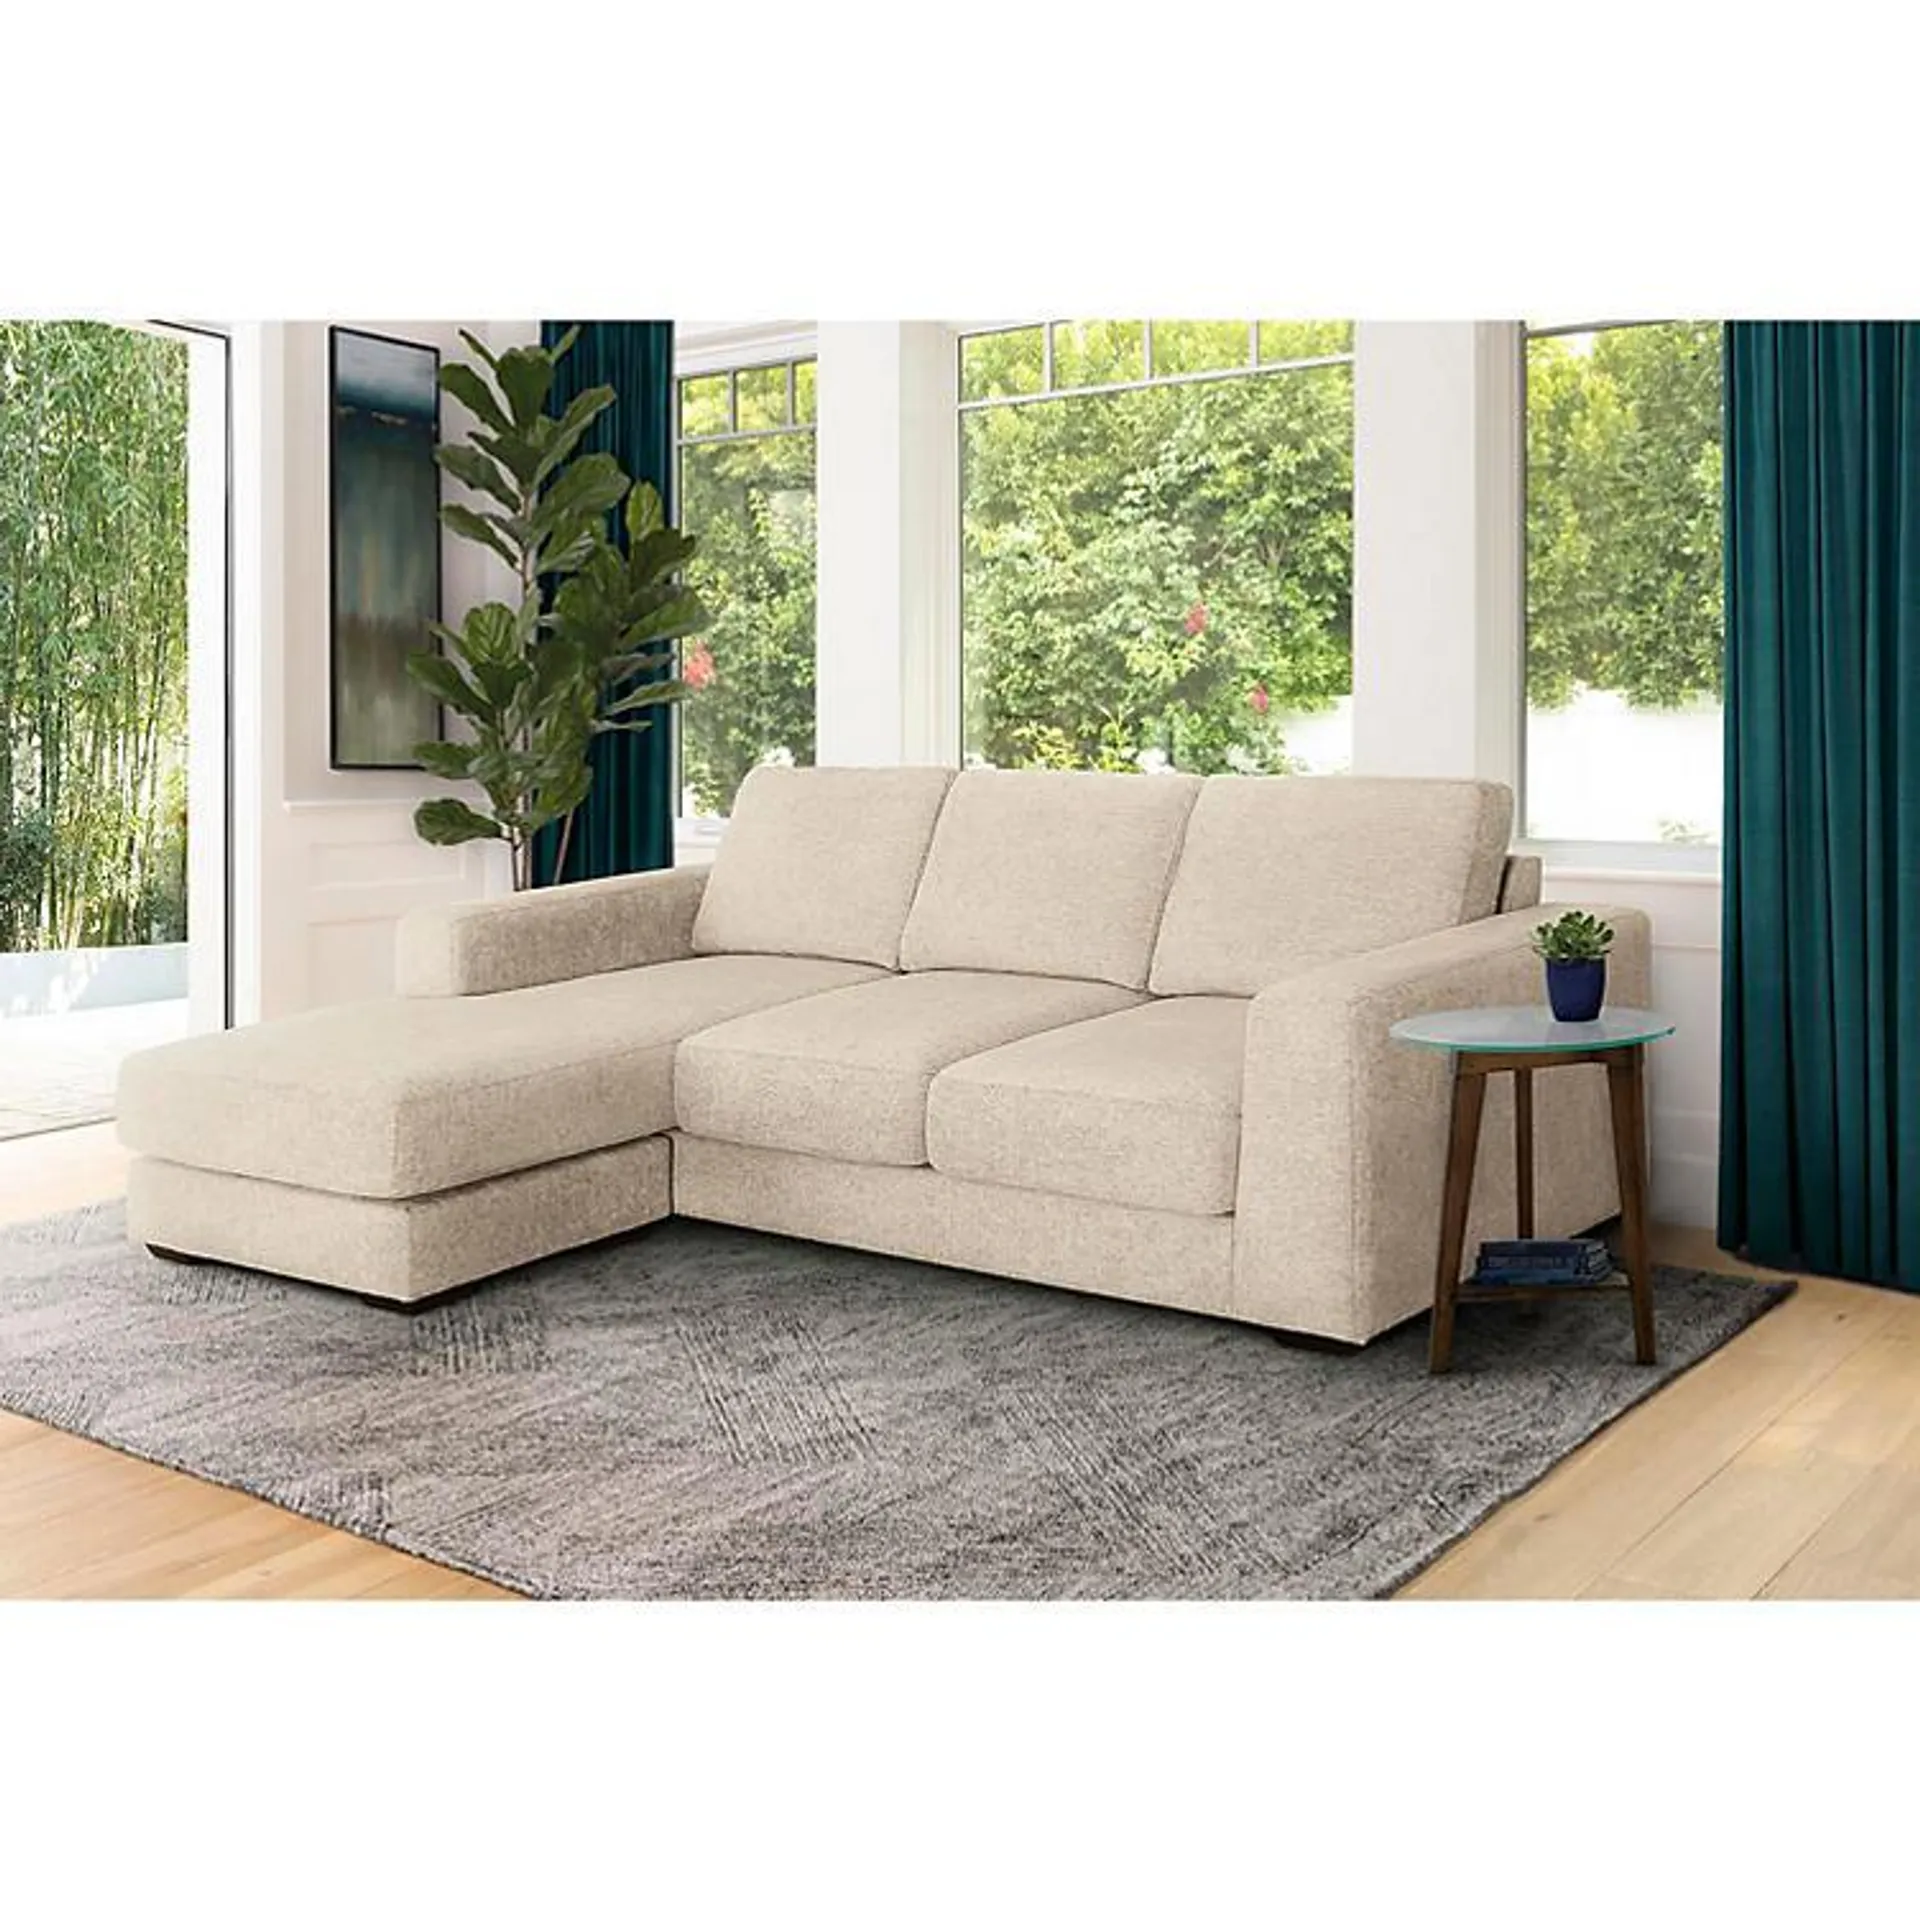 Elliot Reversible Sofa Chaise Sectional, Assorted Colors